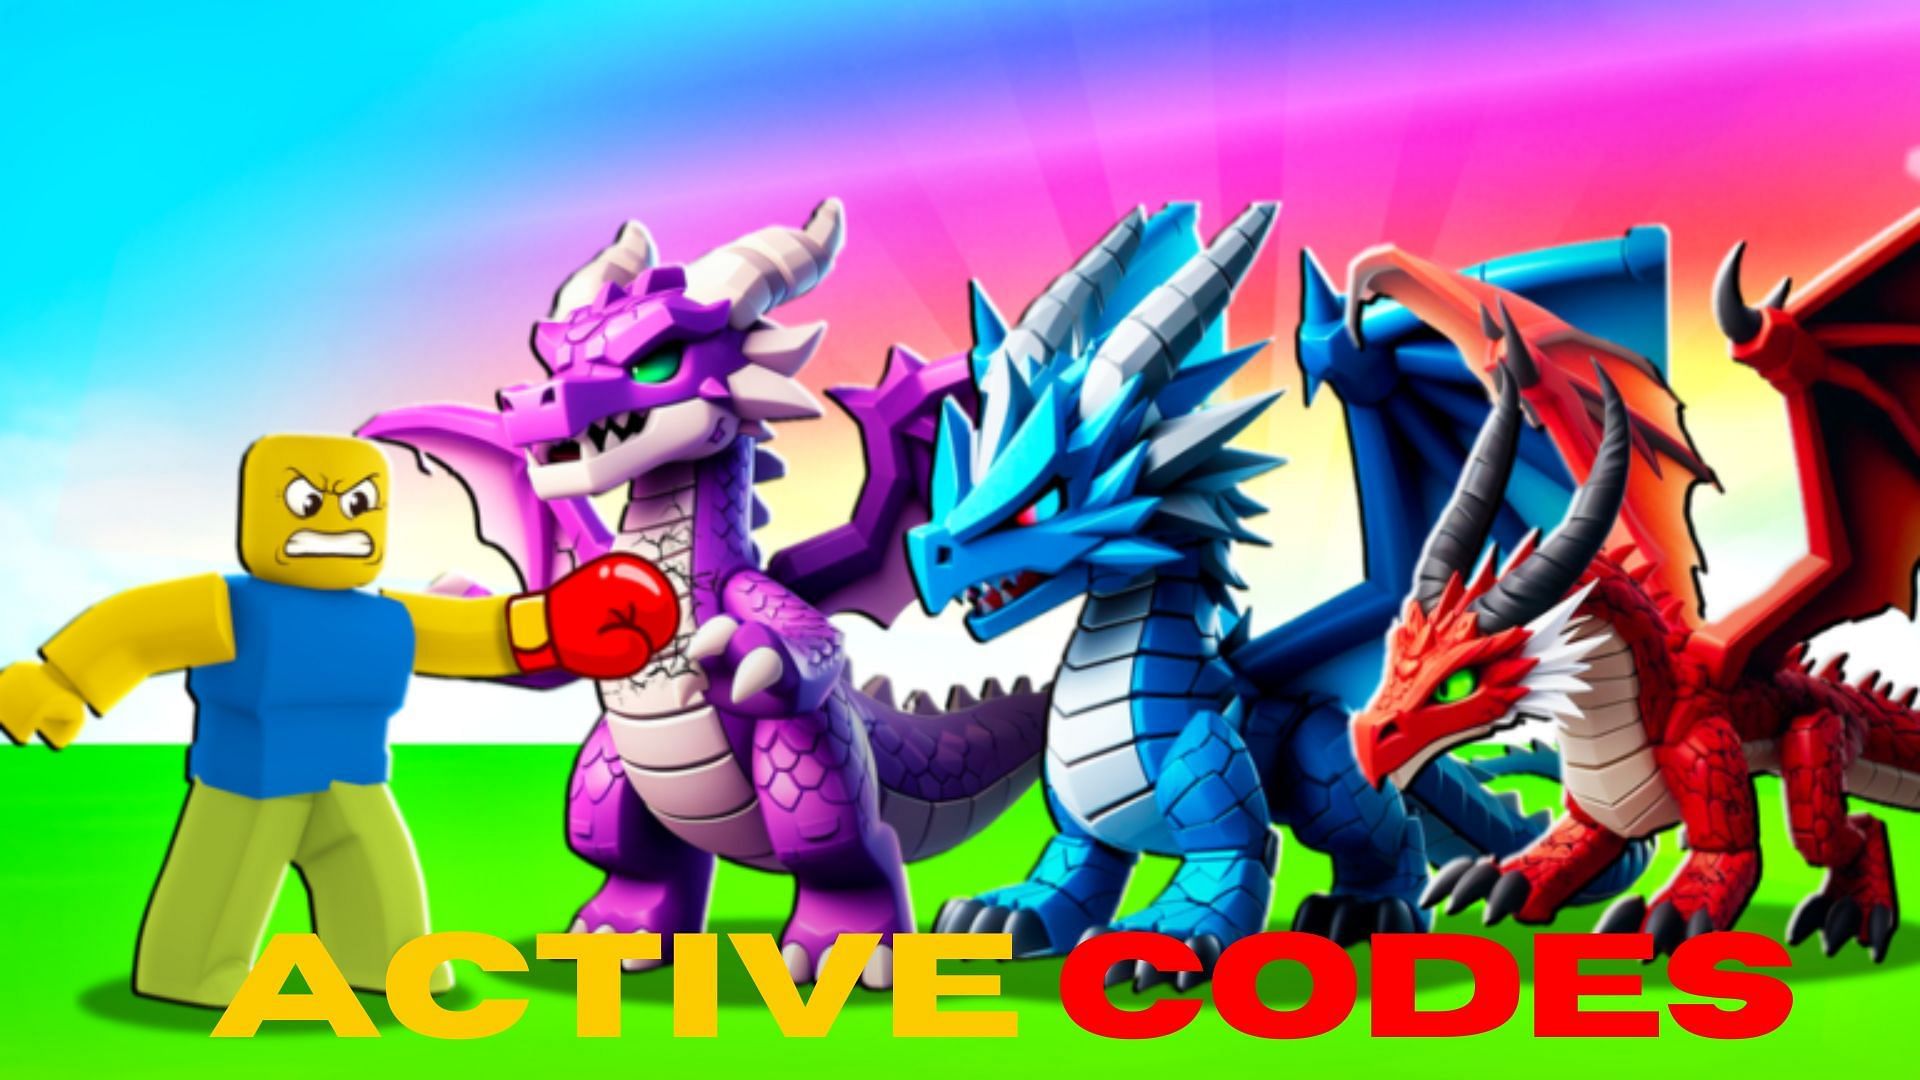 Use the active codes to get free Potions in Punch Dragons Simulator (Roblox||Sportskeeda)